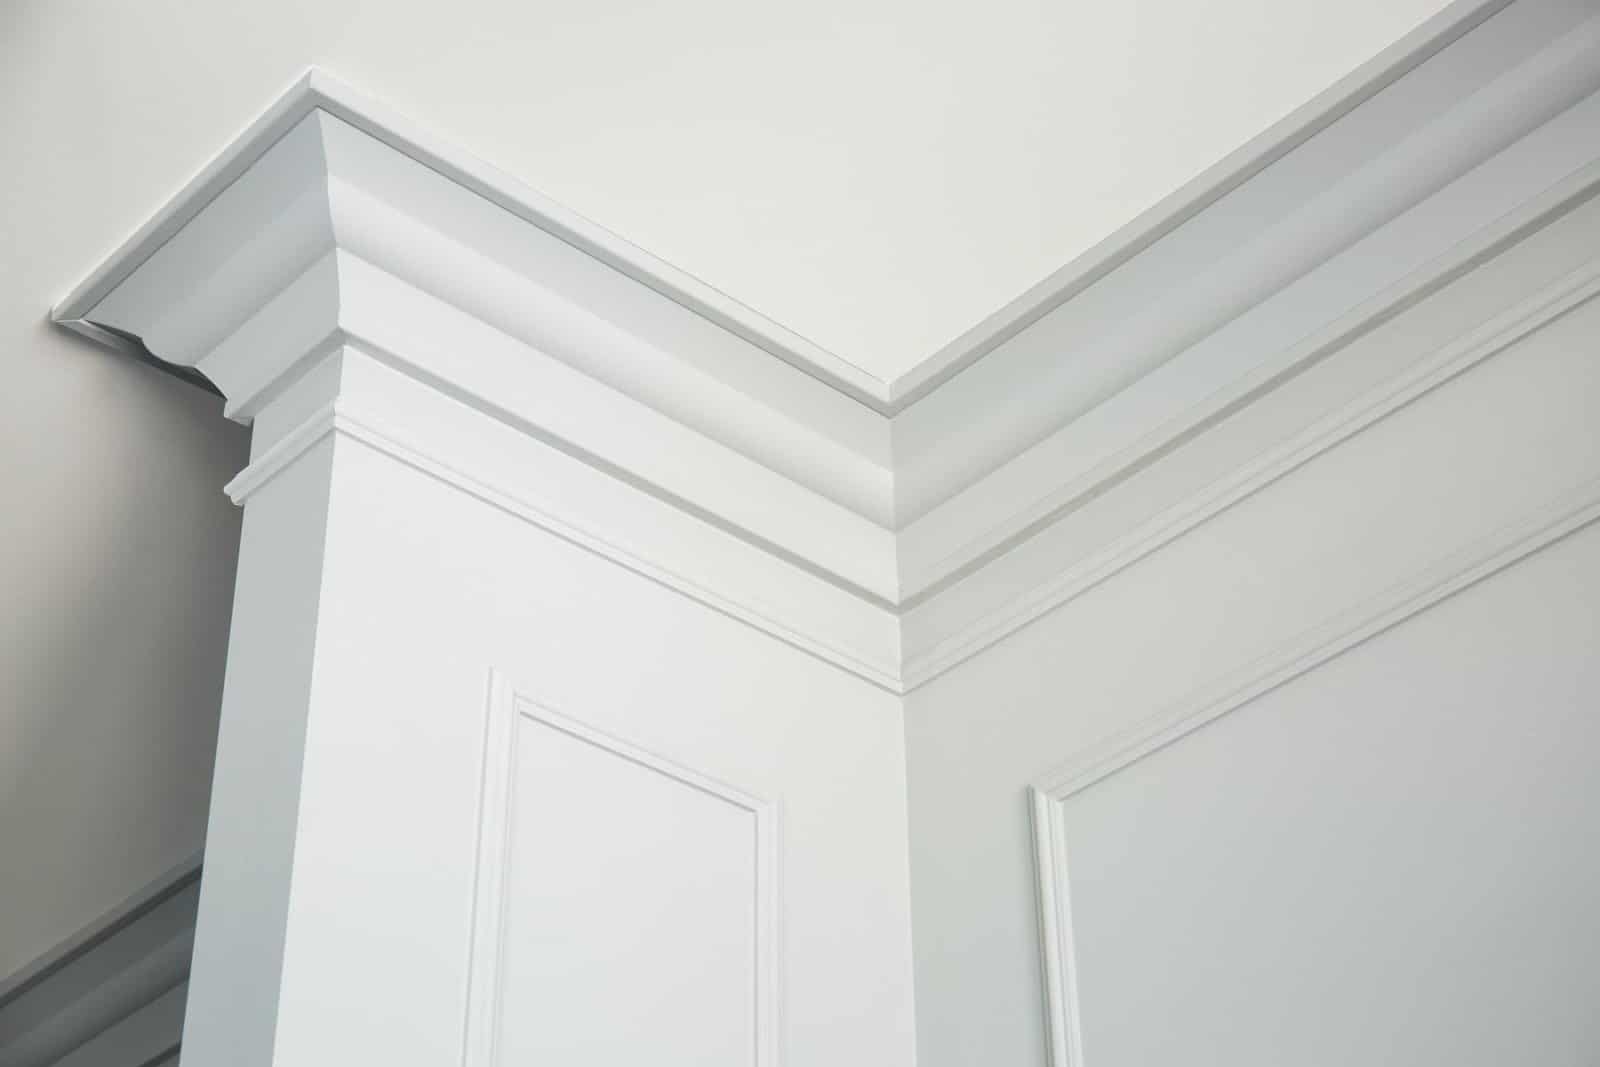 What Is The Ideal Baseboard Size For A 9-Foot Ceiling